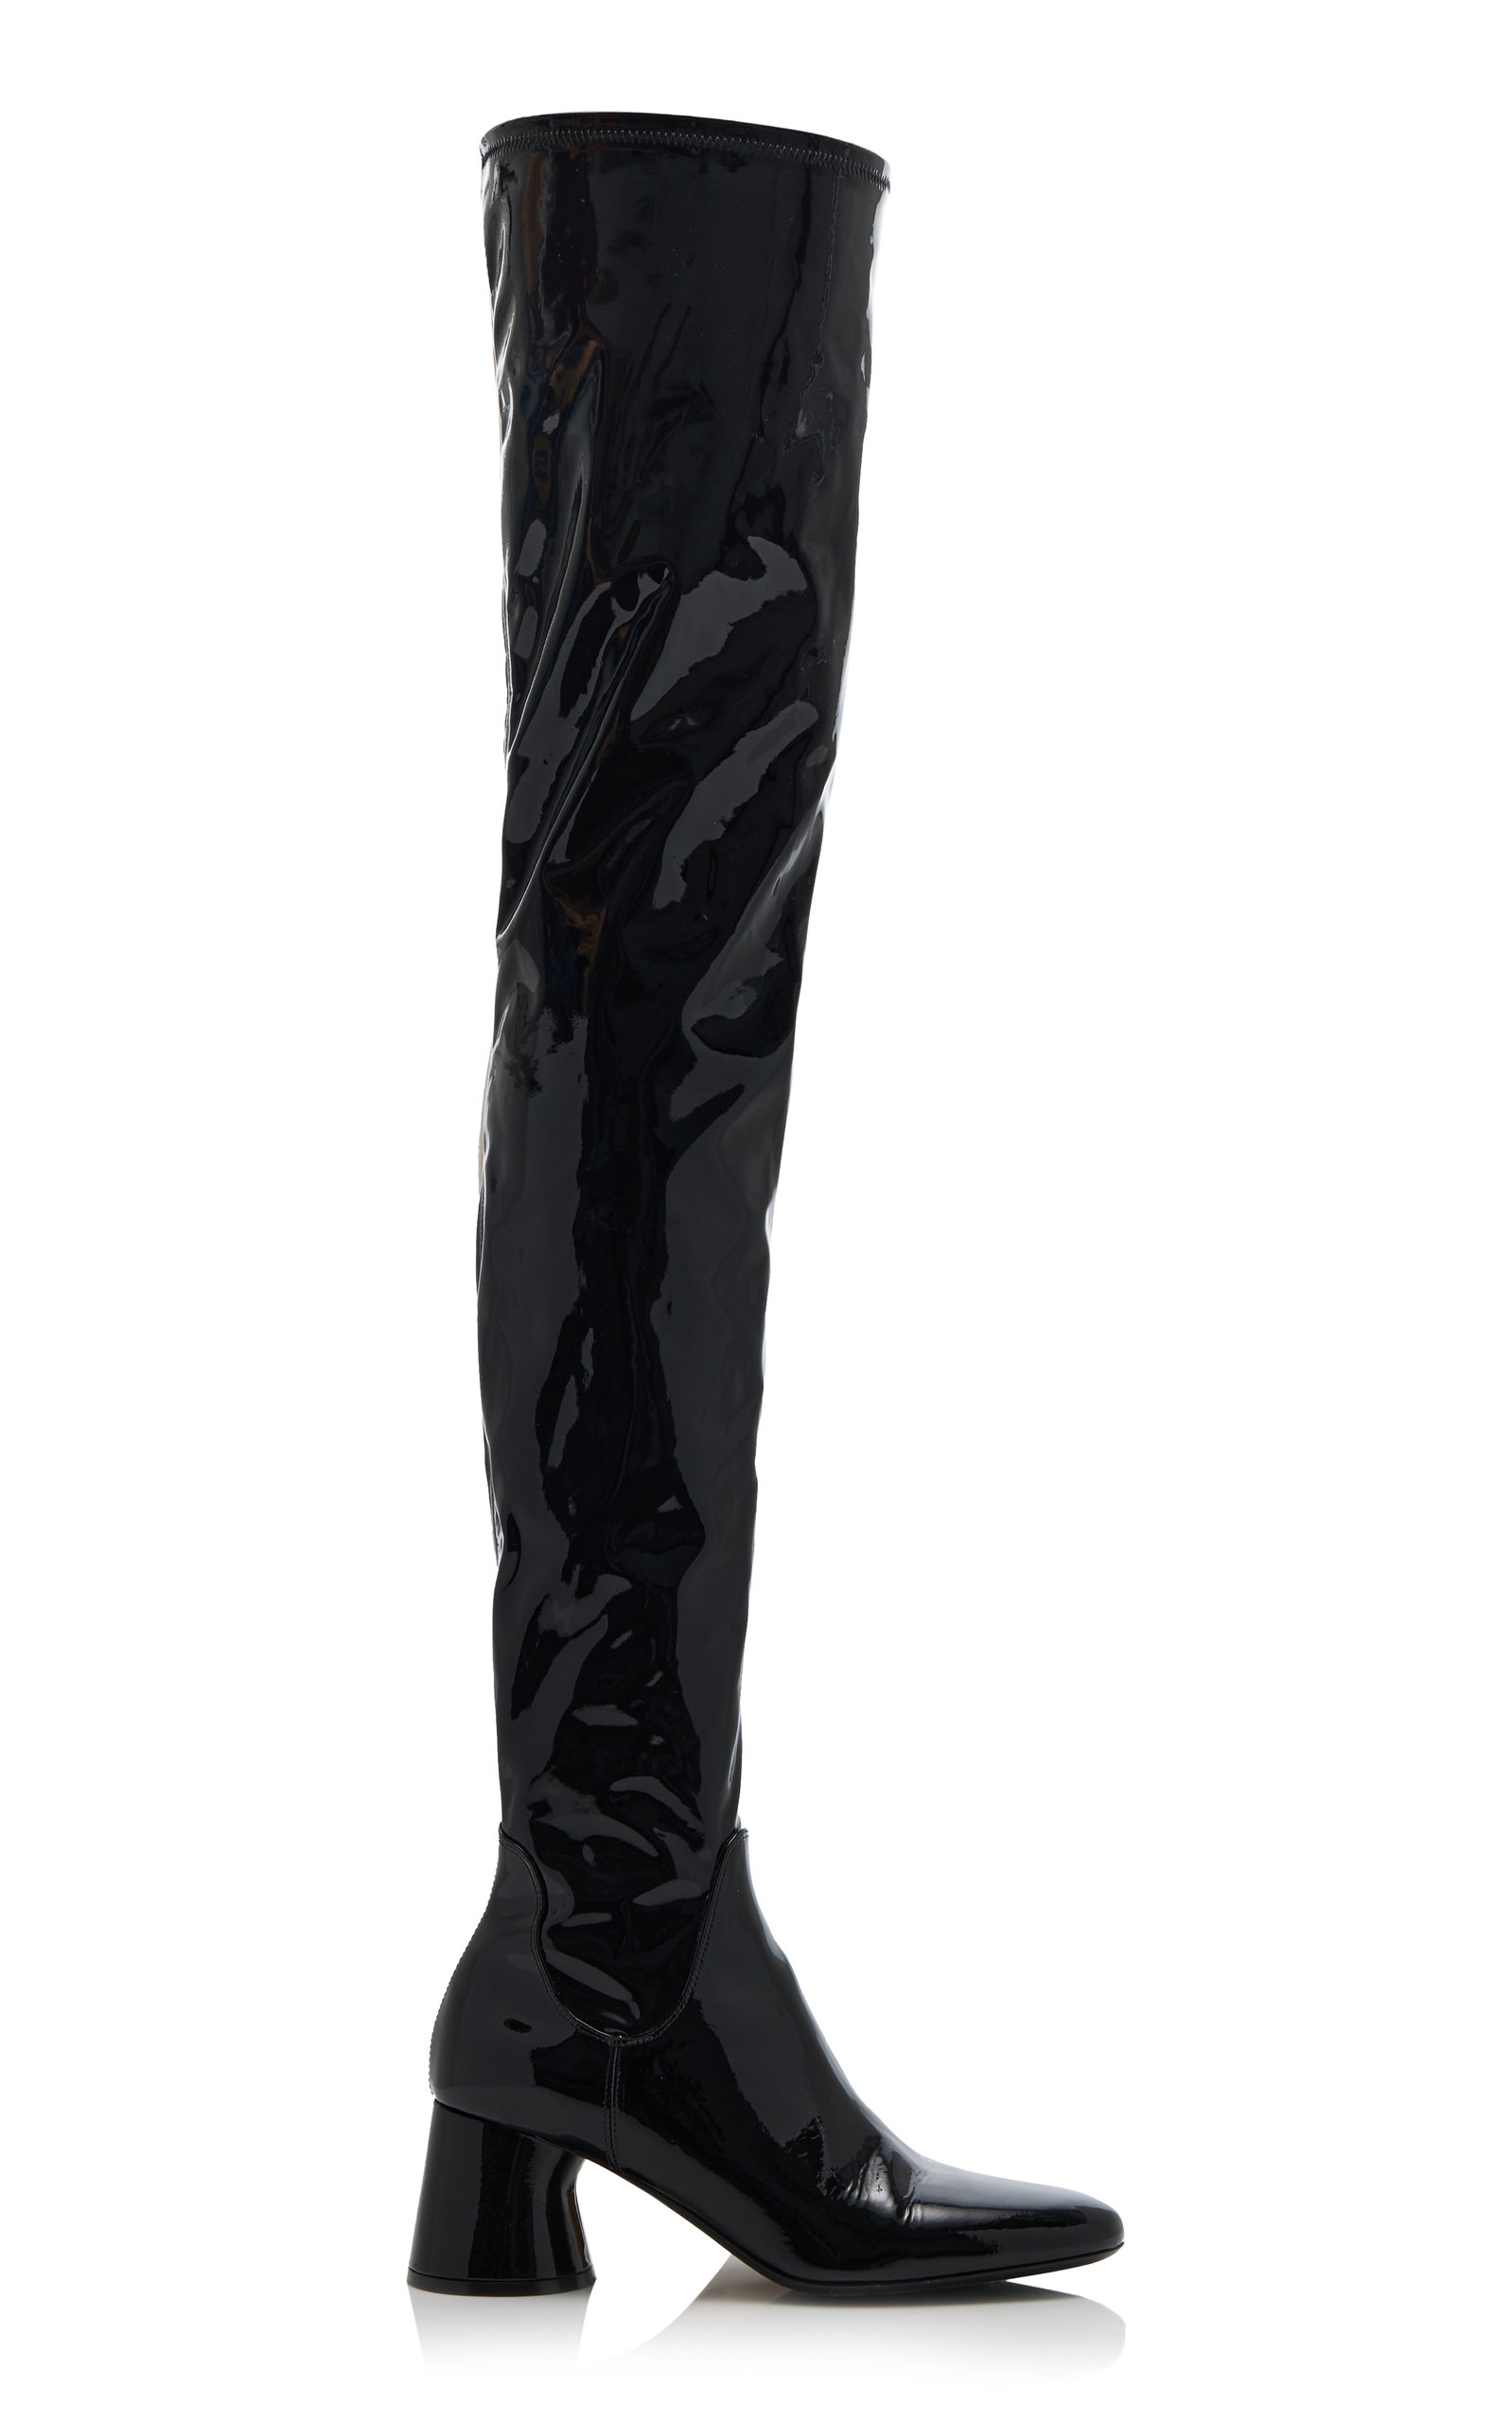 Khaite Women's Wythe Patent Leather Over-The-Knee Boots